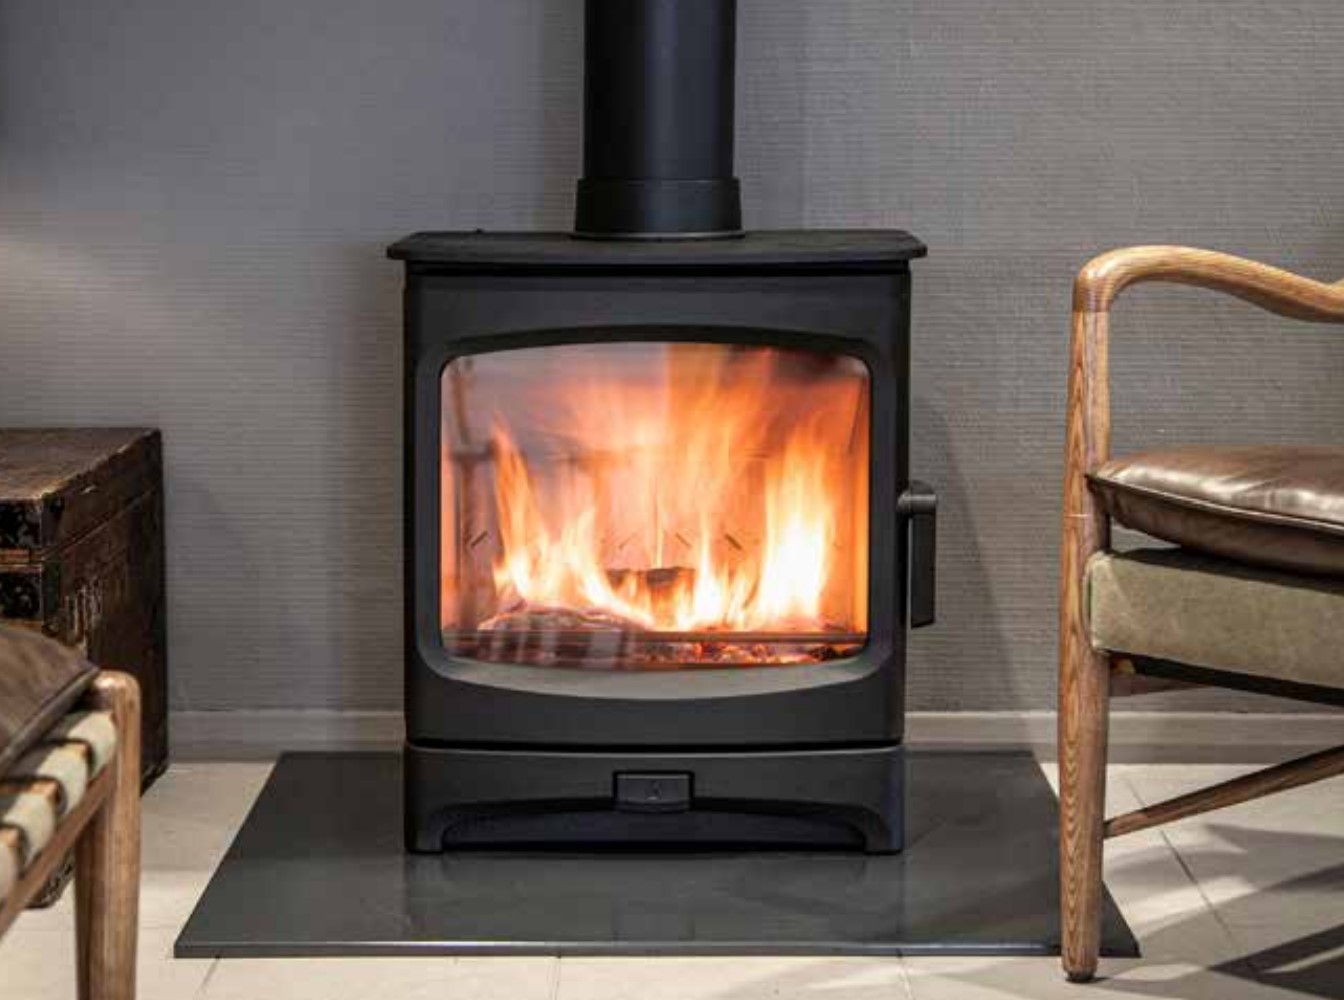 New Stoves Release: Cranmore 3 & C-Five Duo